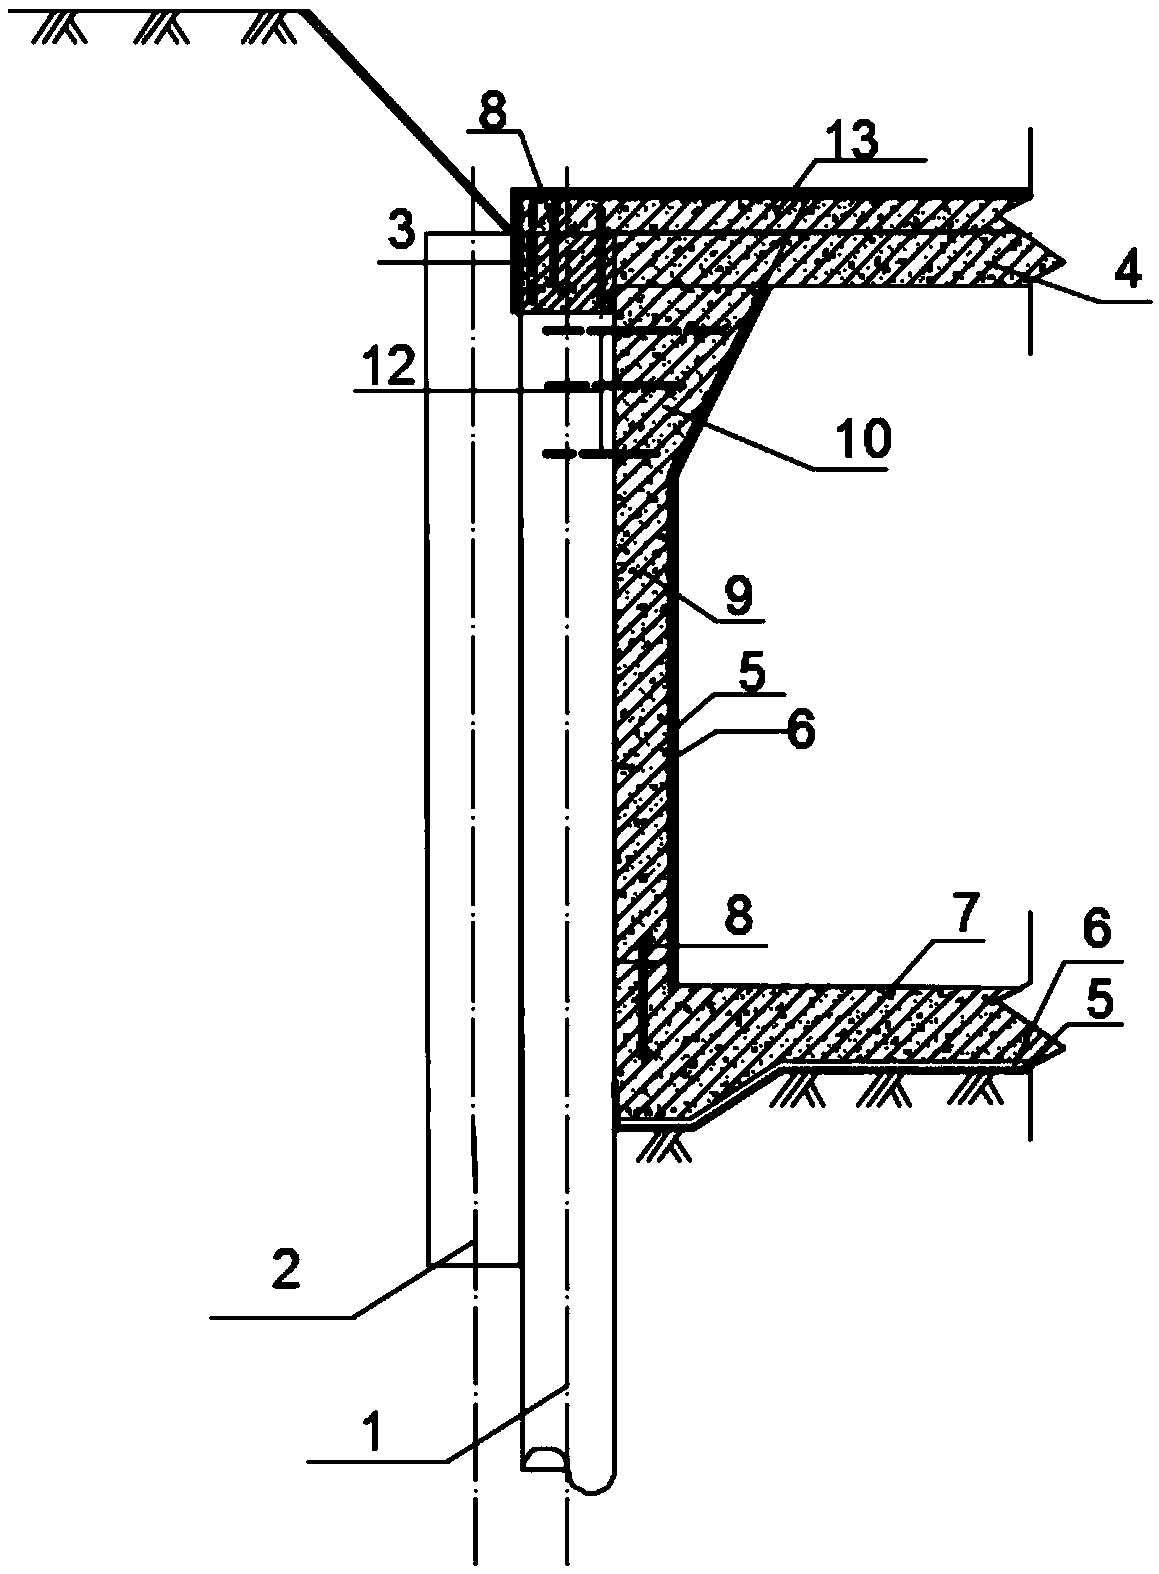 Support and pipe rack structure integrated system and construction method